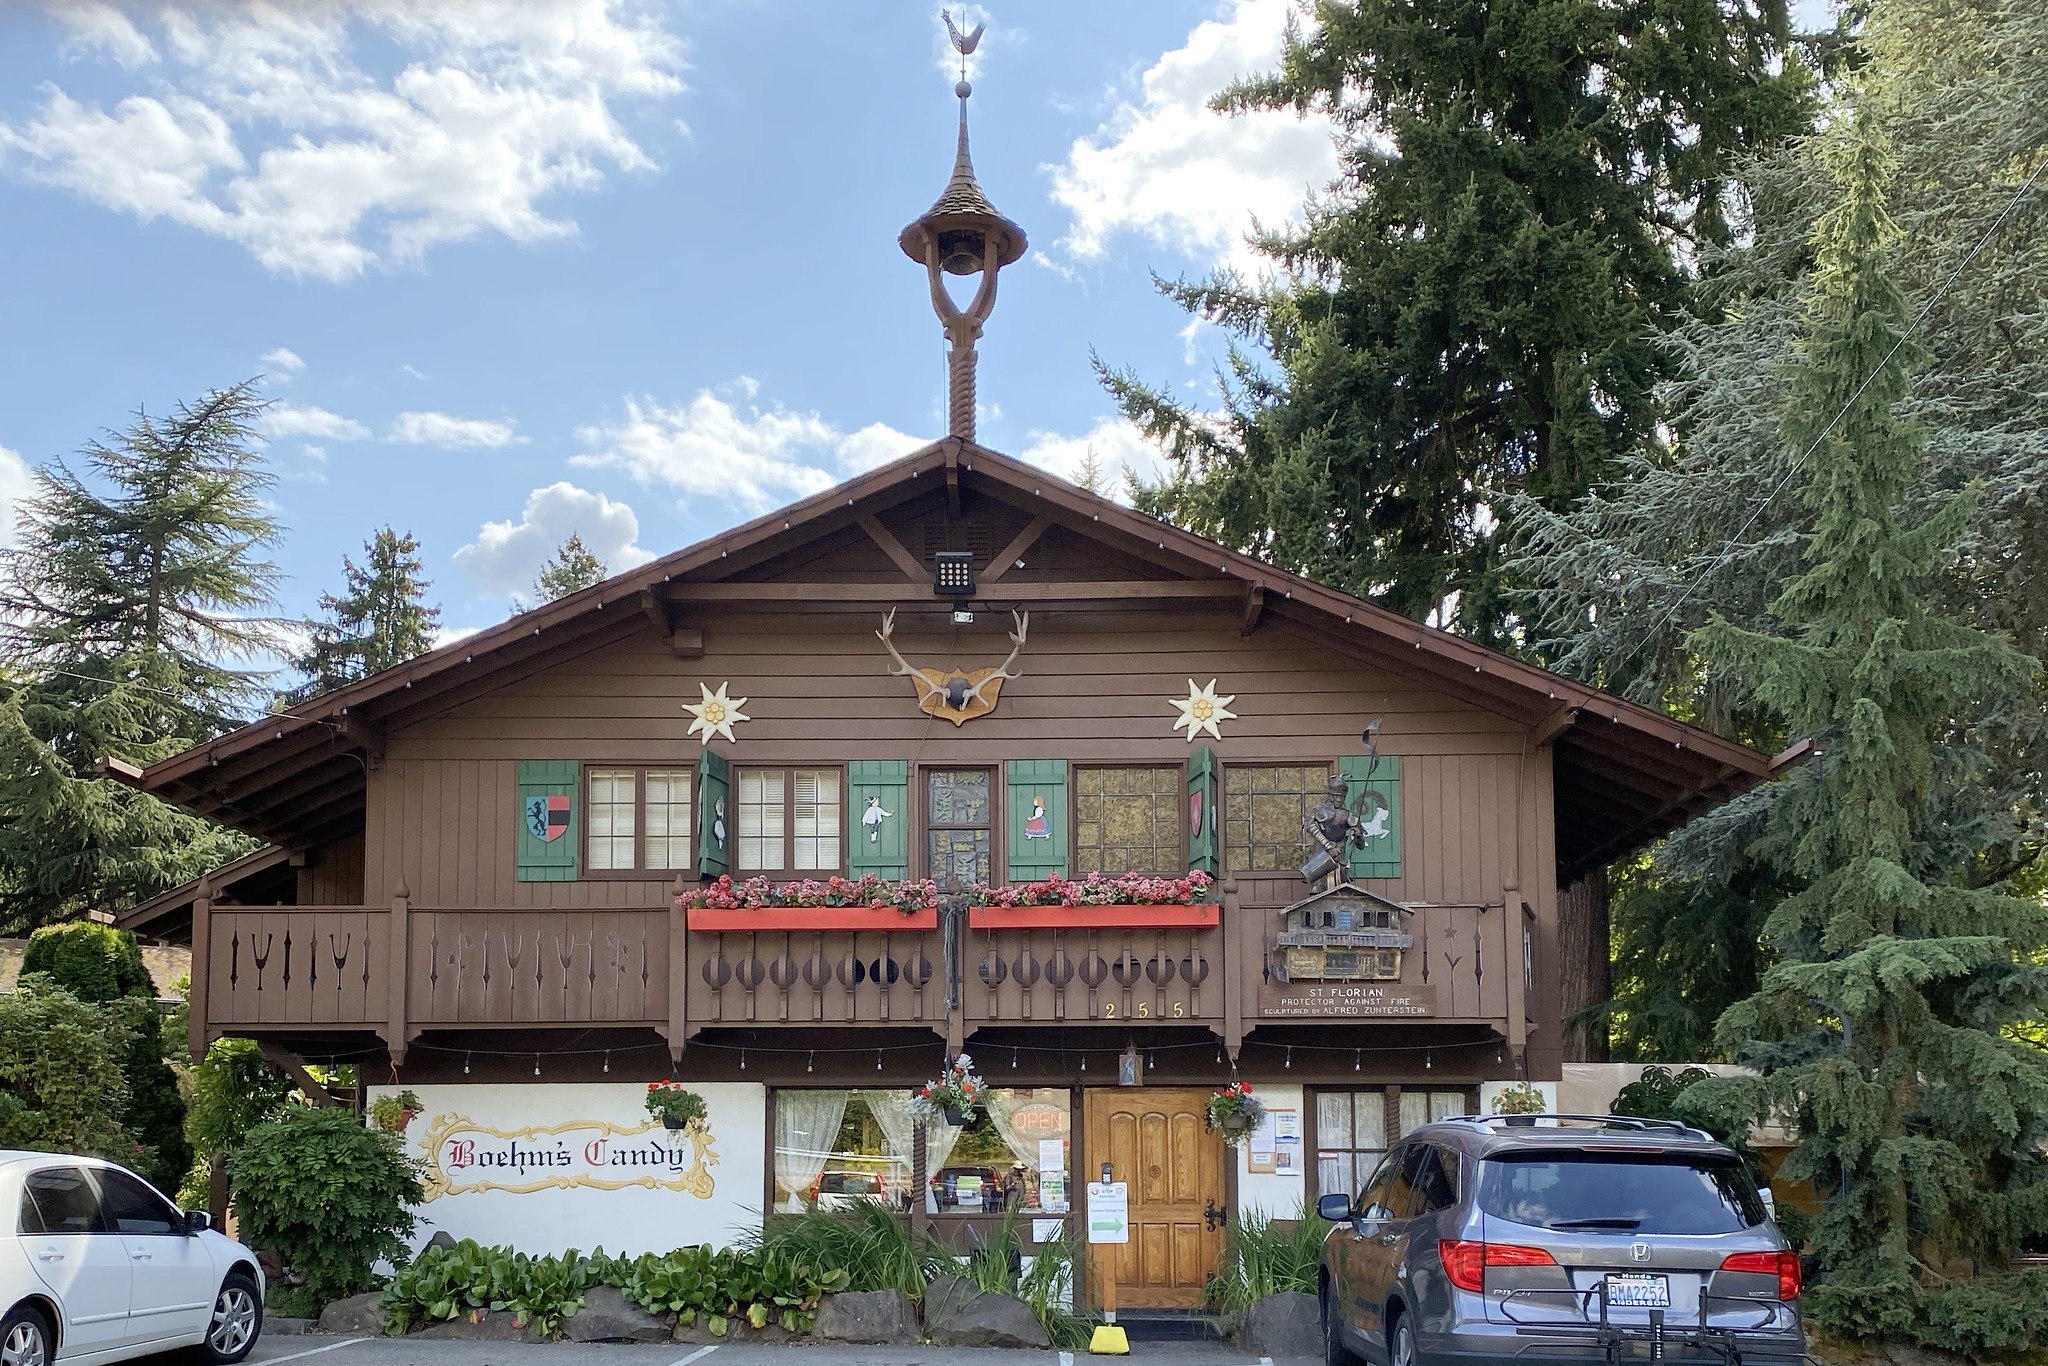 Boehm’s Candy, Inc. has been a local favorite in Issaquah for 35 years and serves highly sought traditional Austrian candy.